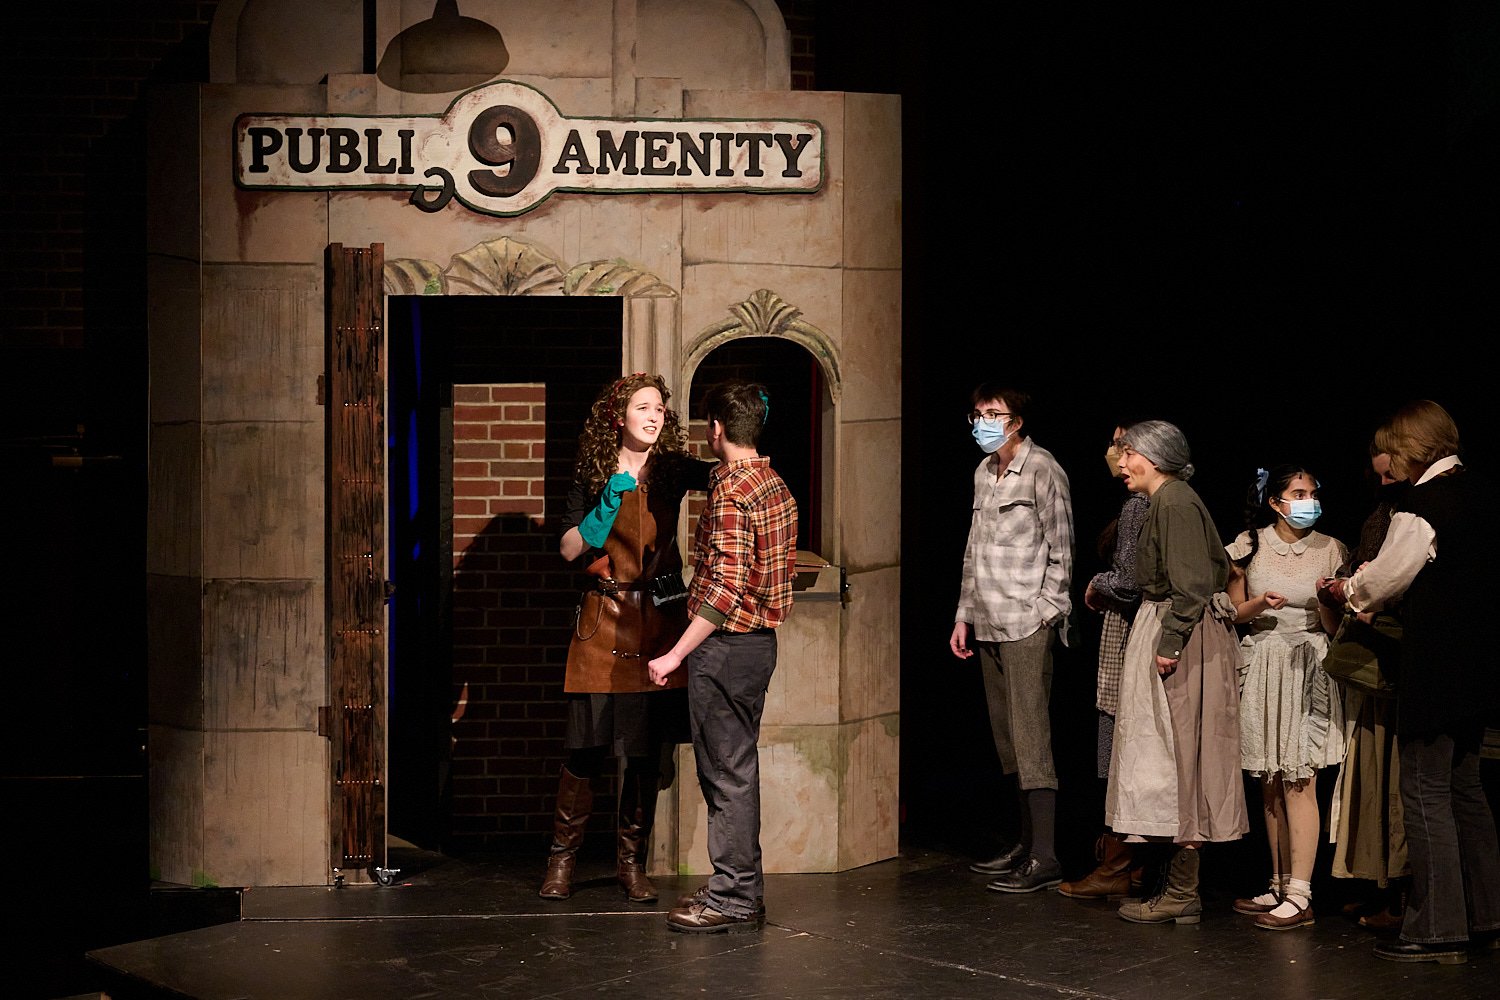  SEWICKLEY, PA, USA - MARCH 2ND 2022: High School students of Sewickley Academy are performing in an annual musical show “Urinetown” running on March 3rd-5th 2022. Ella Tominac-Ural 